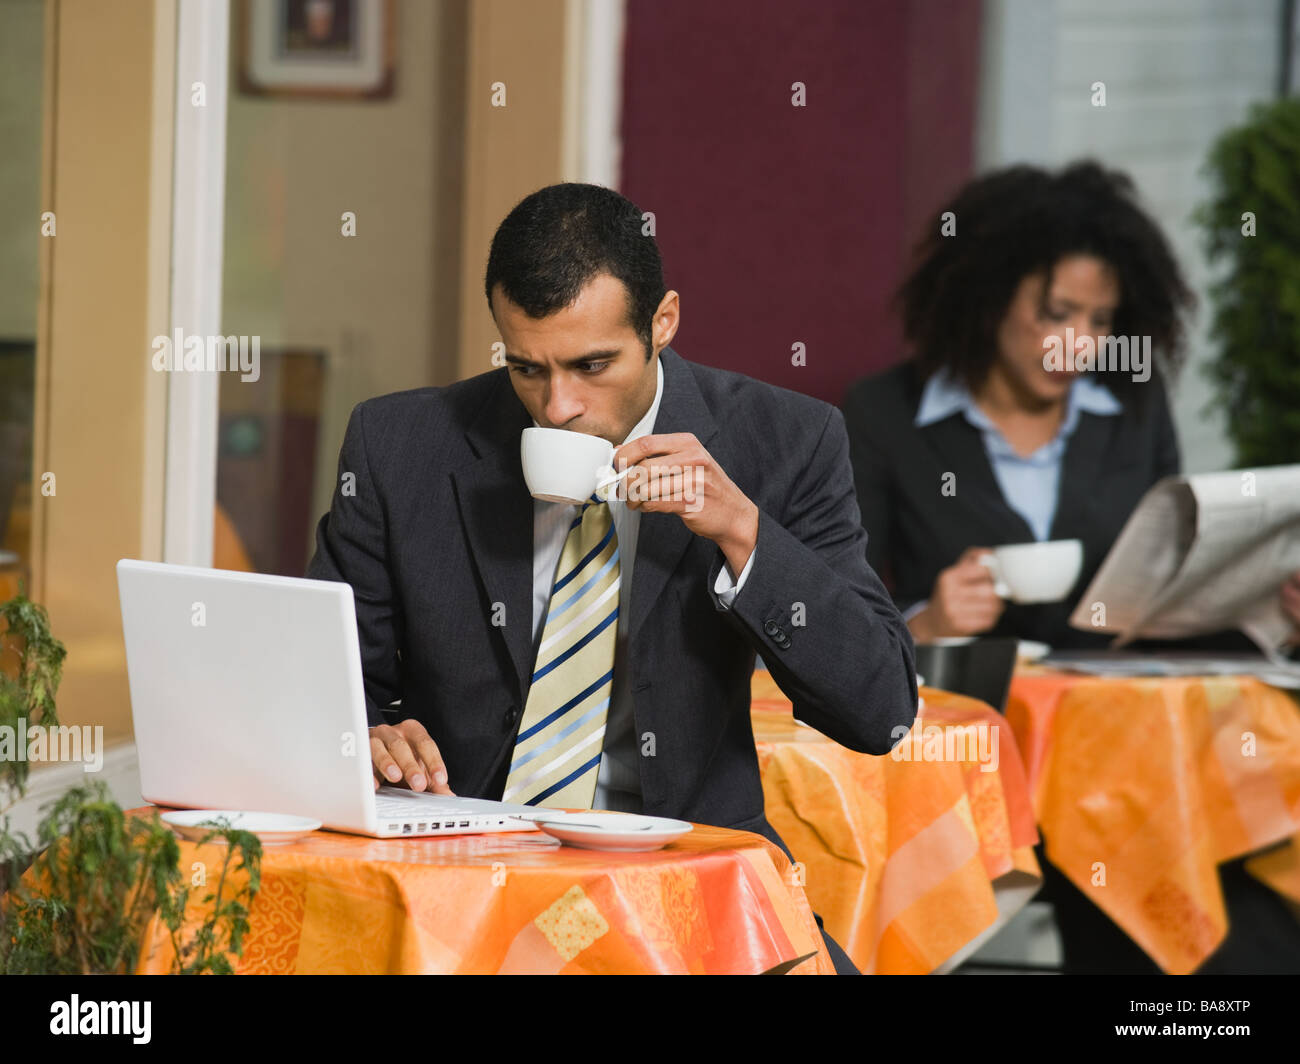 Businessman looking at laptop at outdoor cafe Stock Photo